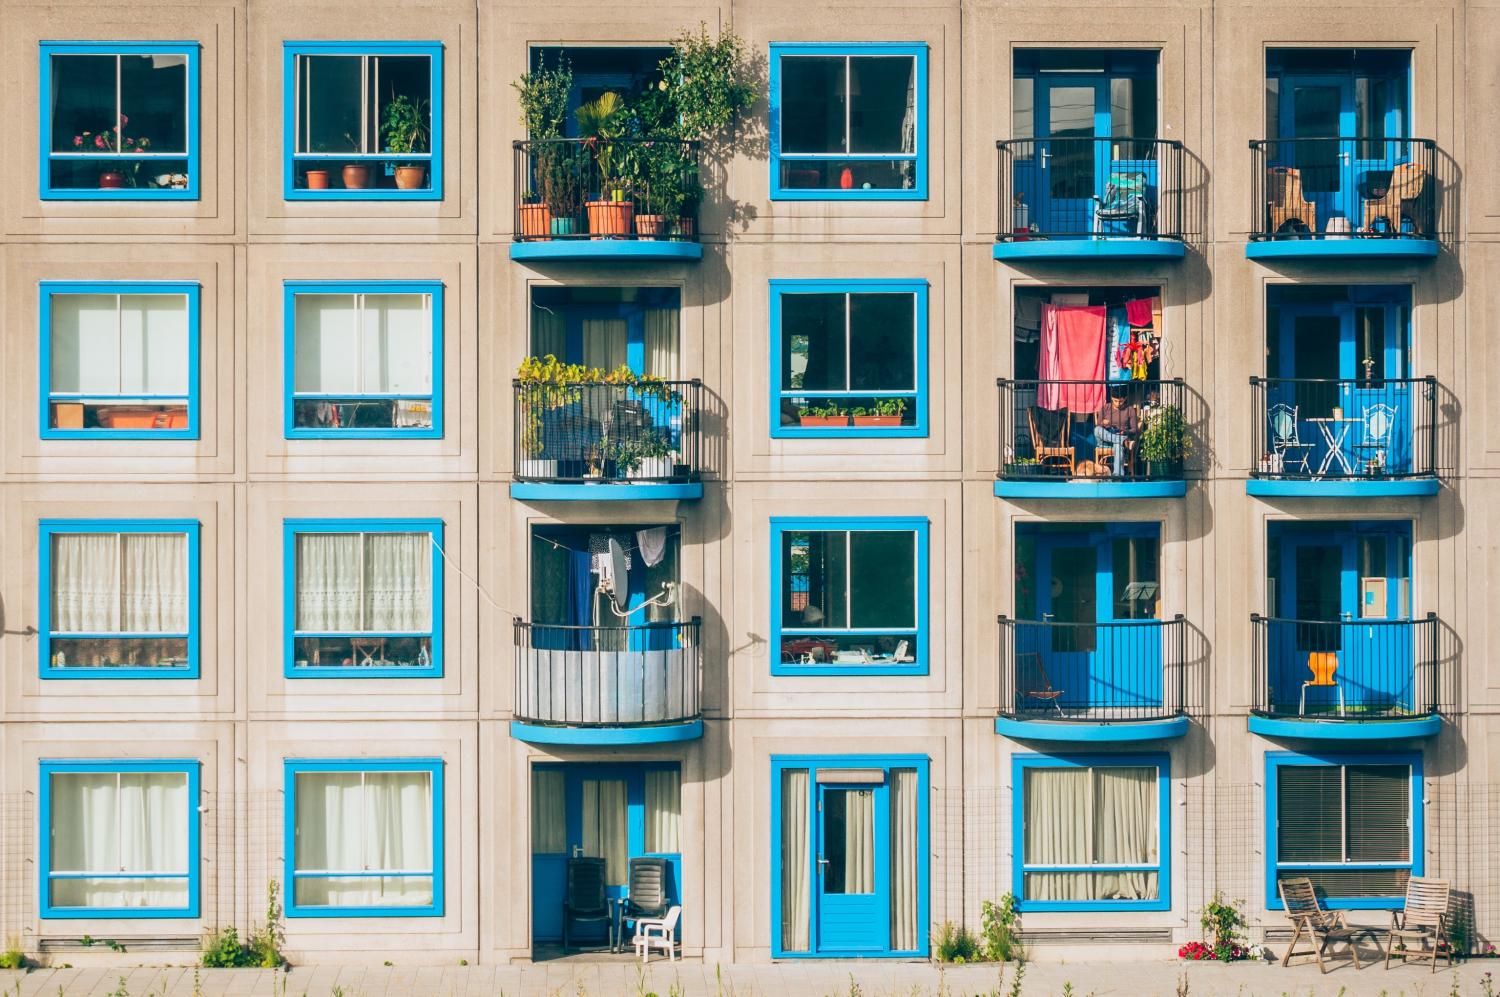 airbnb and apartment scarcity